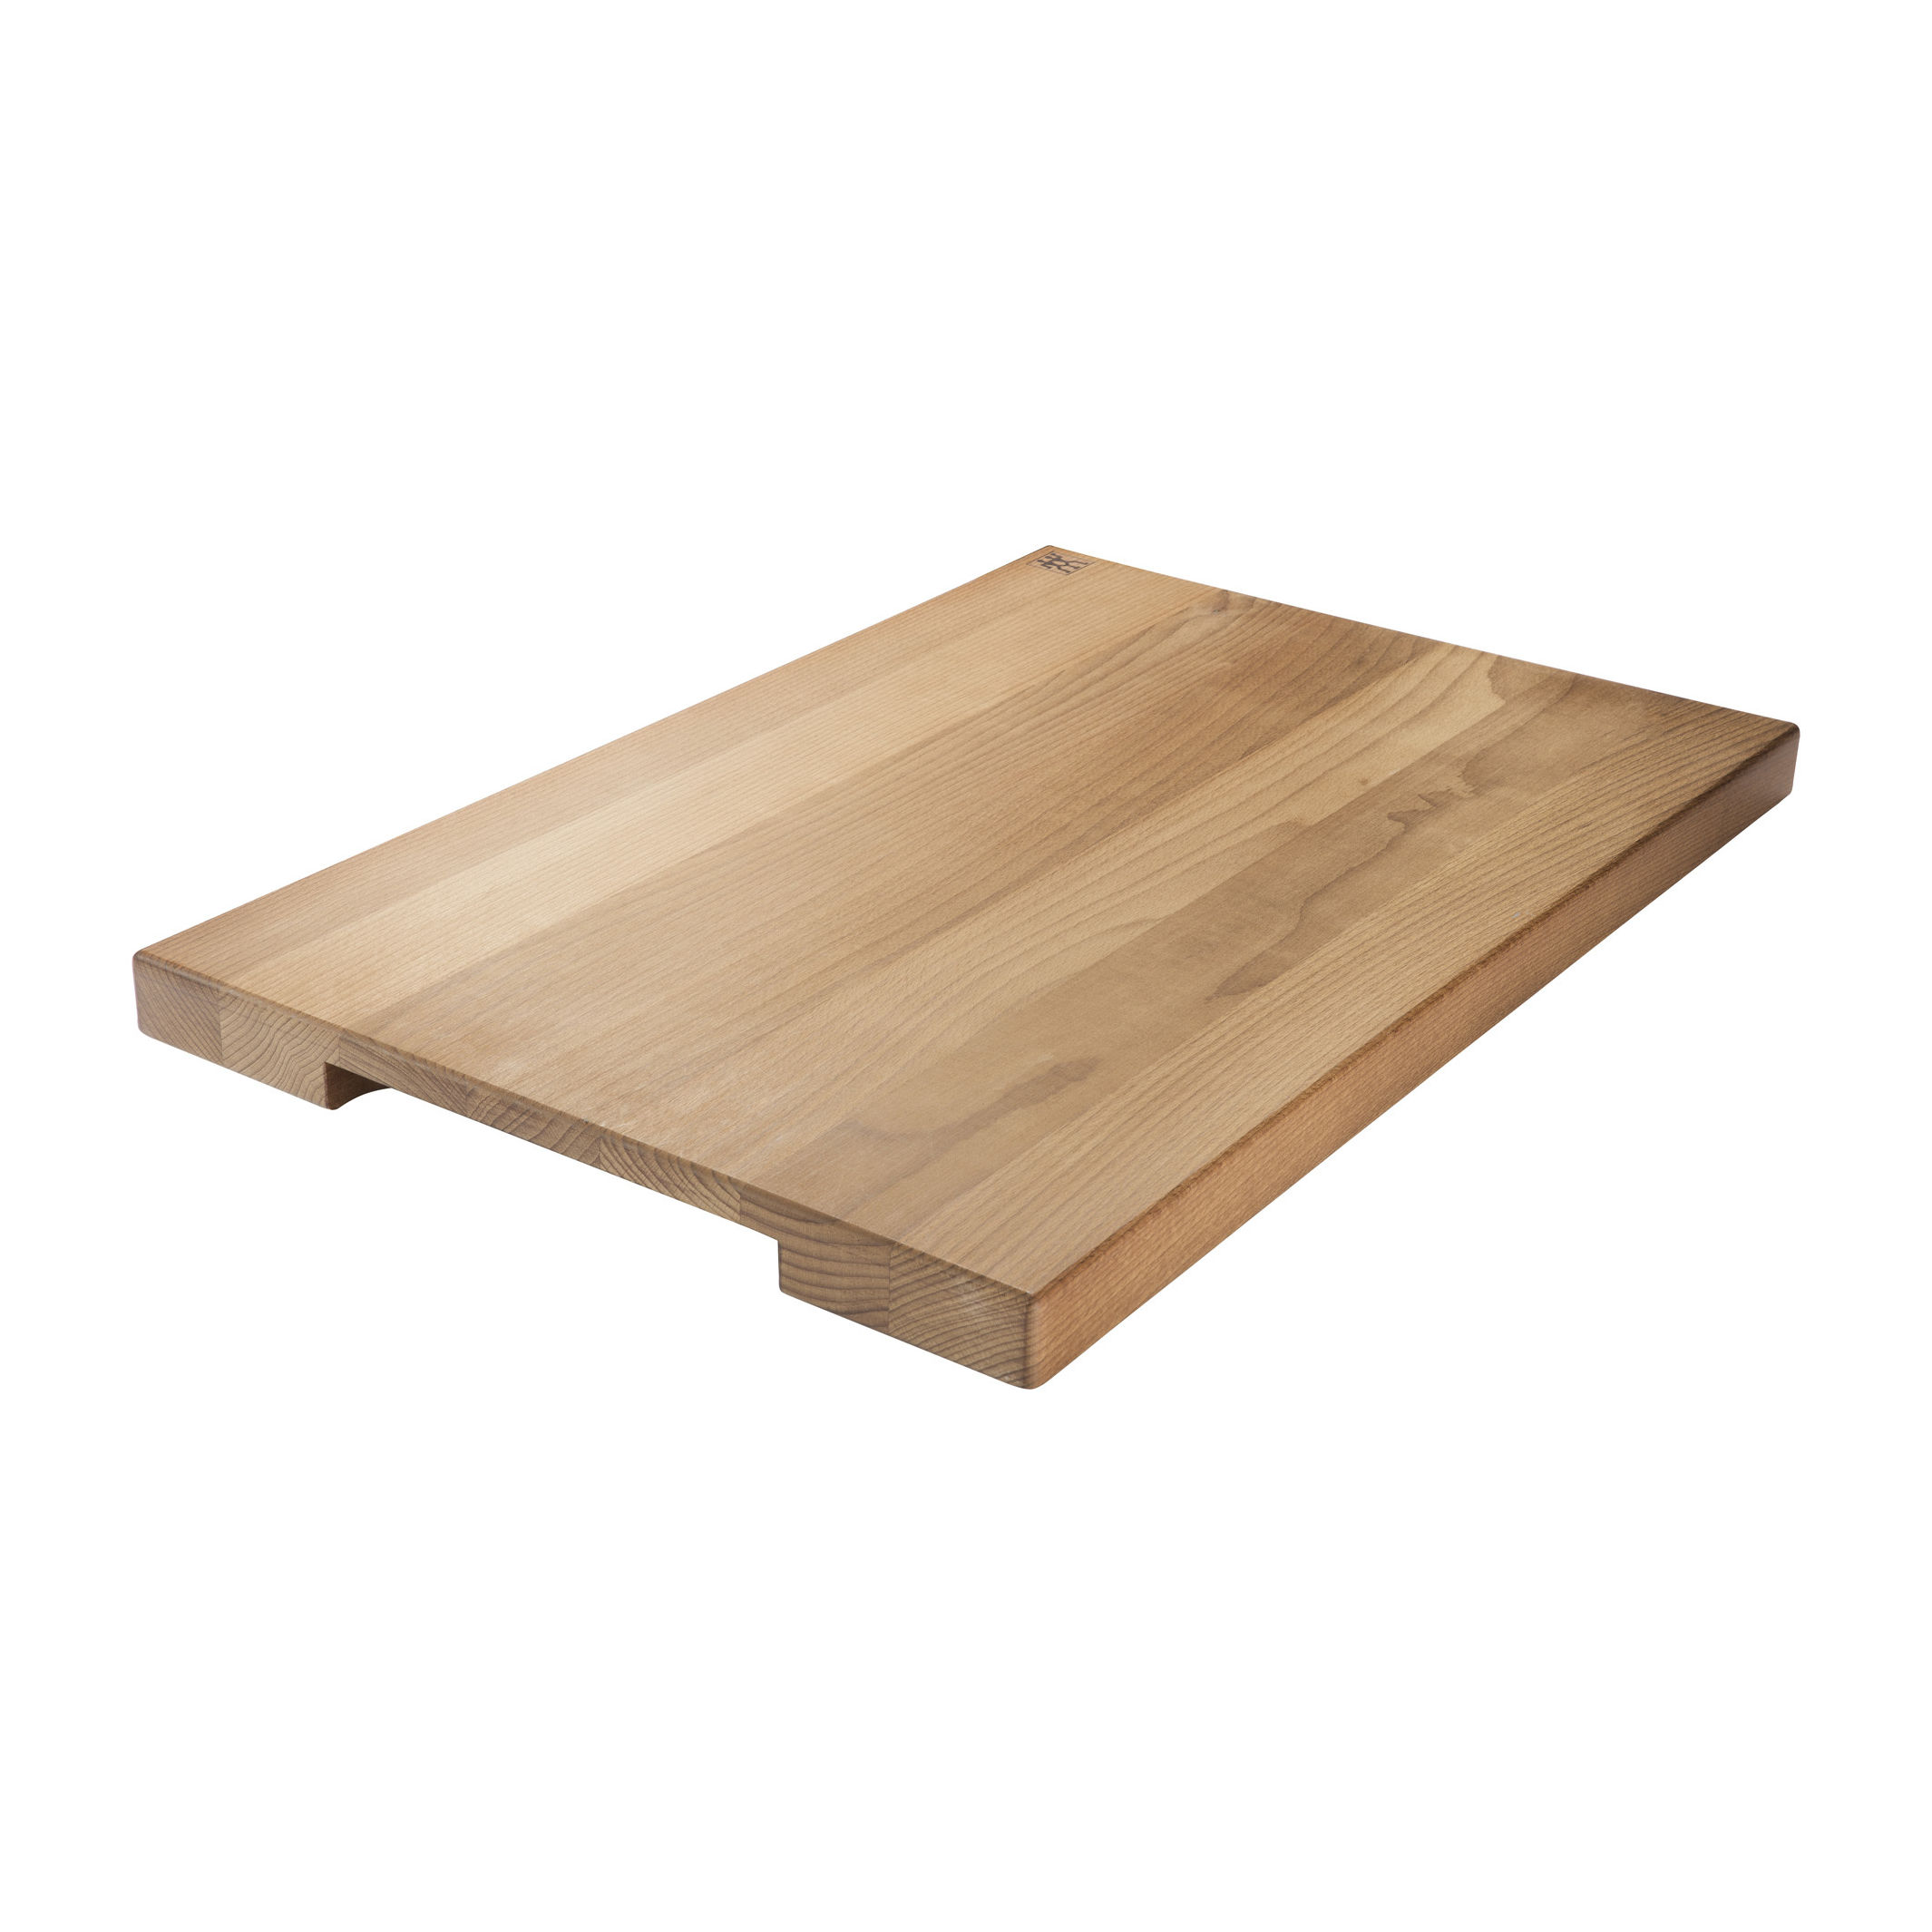 ZWILLING Cherry Wood Carving Board with Handles, 20 x 15 x 1 - Harris  Teeter